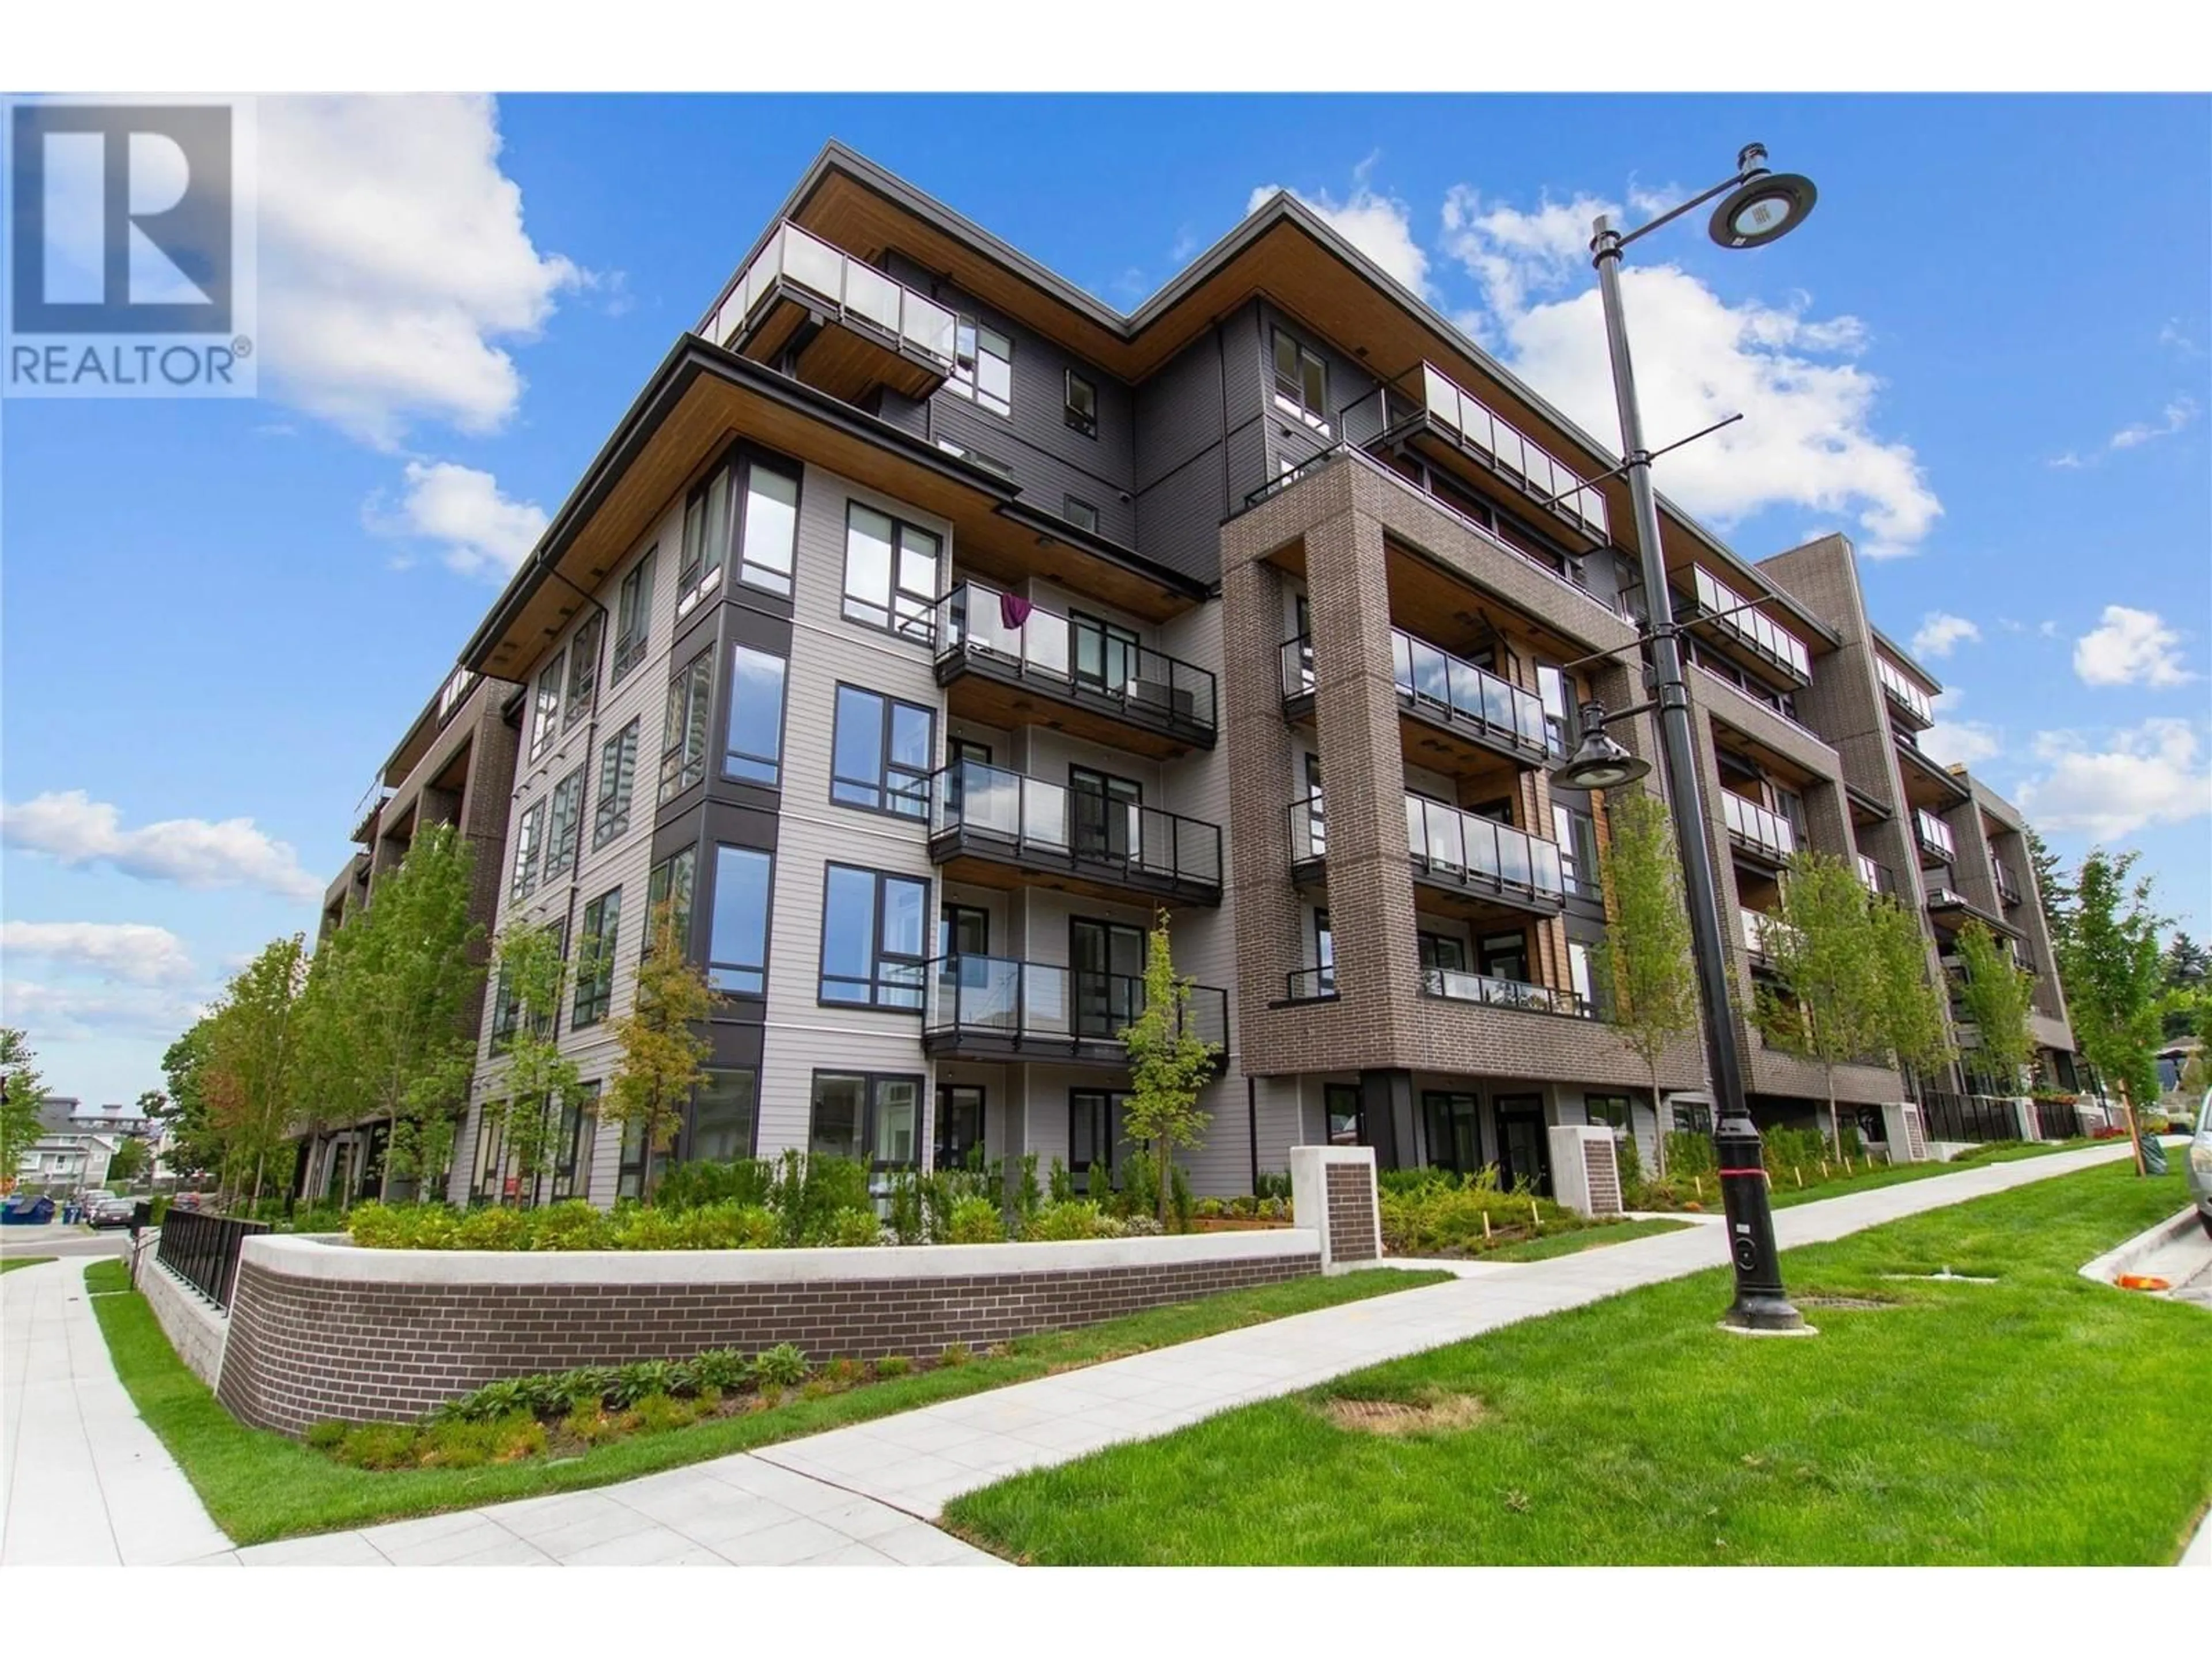 A pic from exterior of the house or condo for 423 615 COTTONWOOD AVENUE, Coquitlam British Columbia V3J0N4